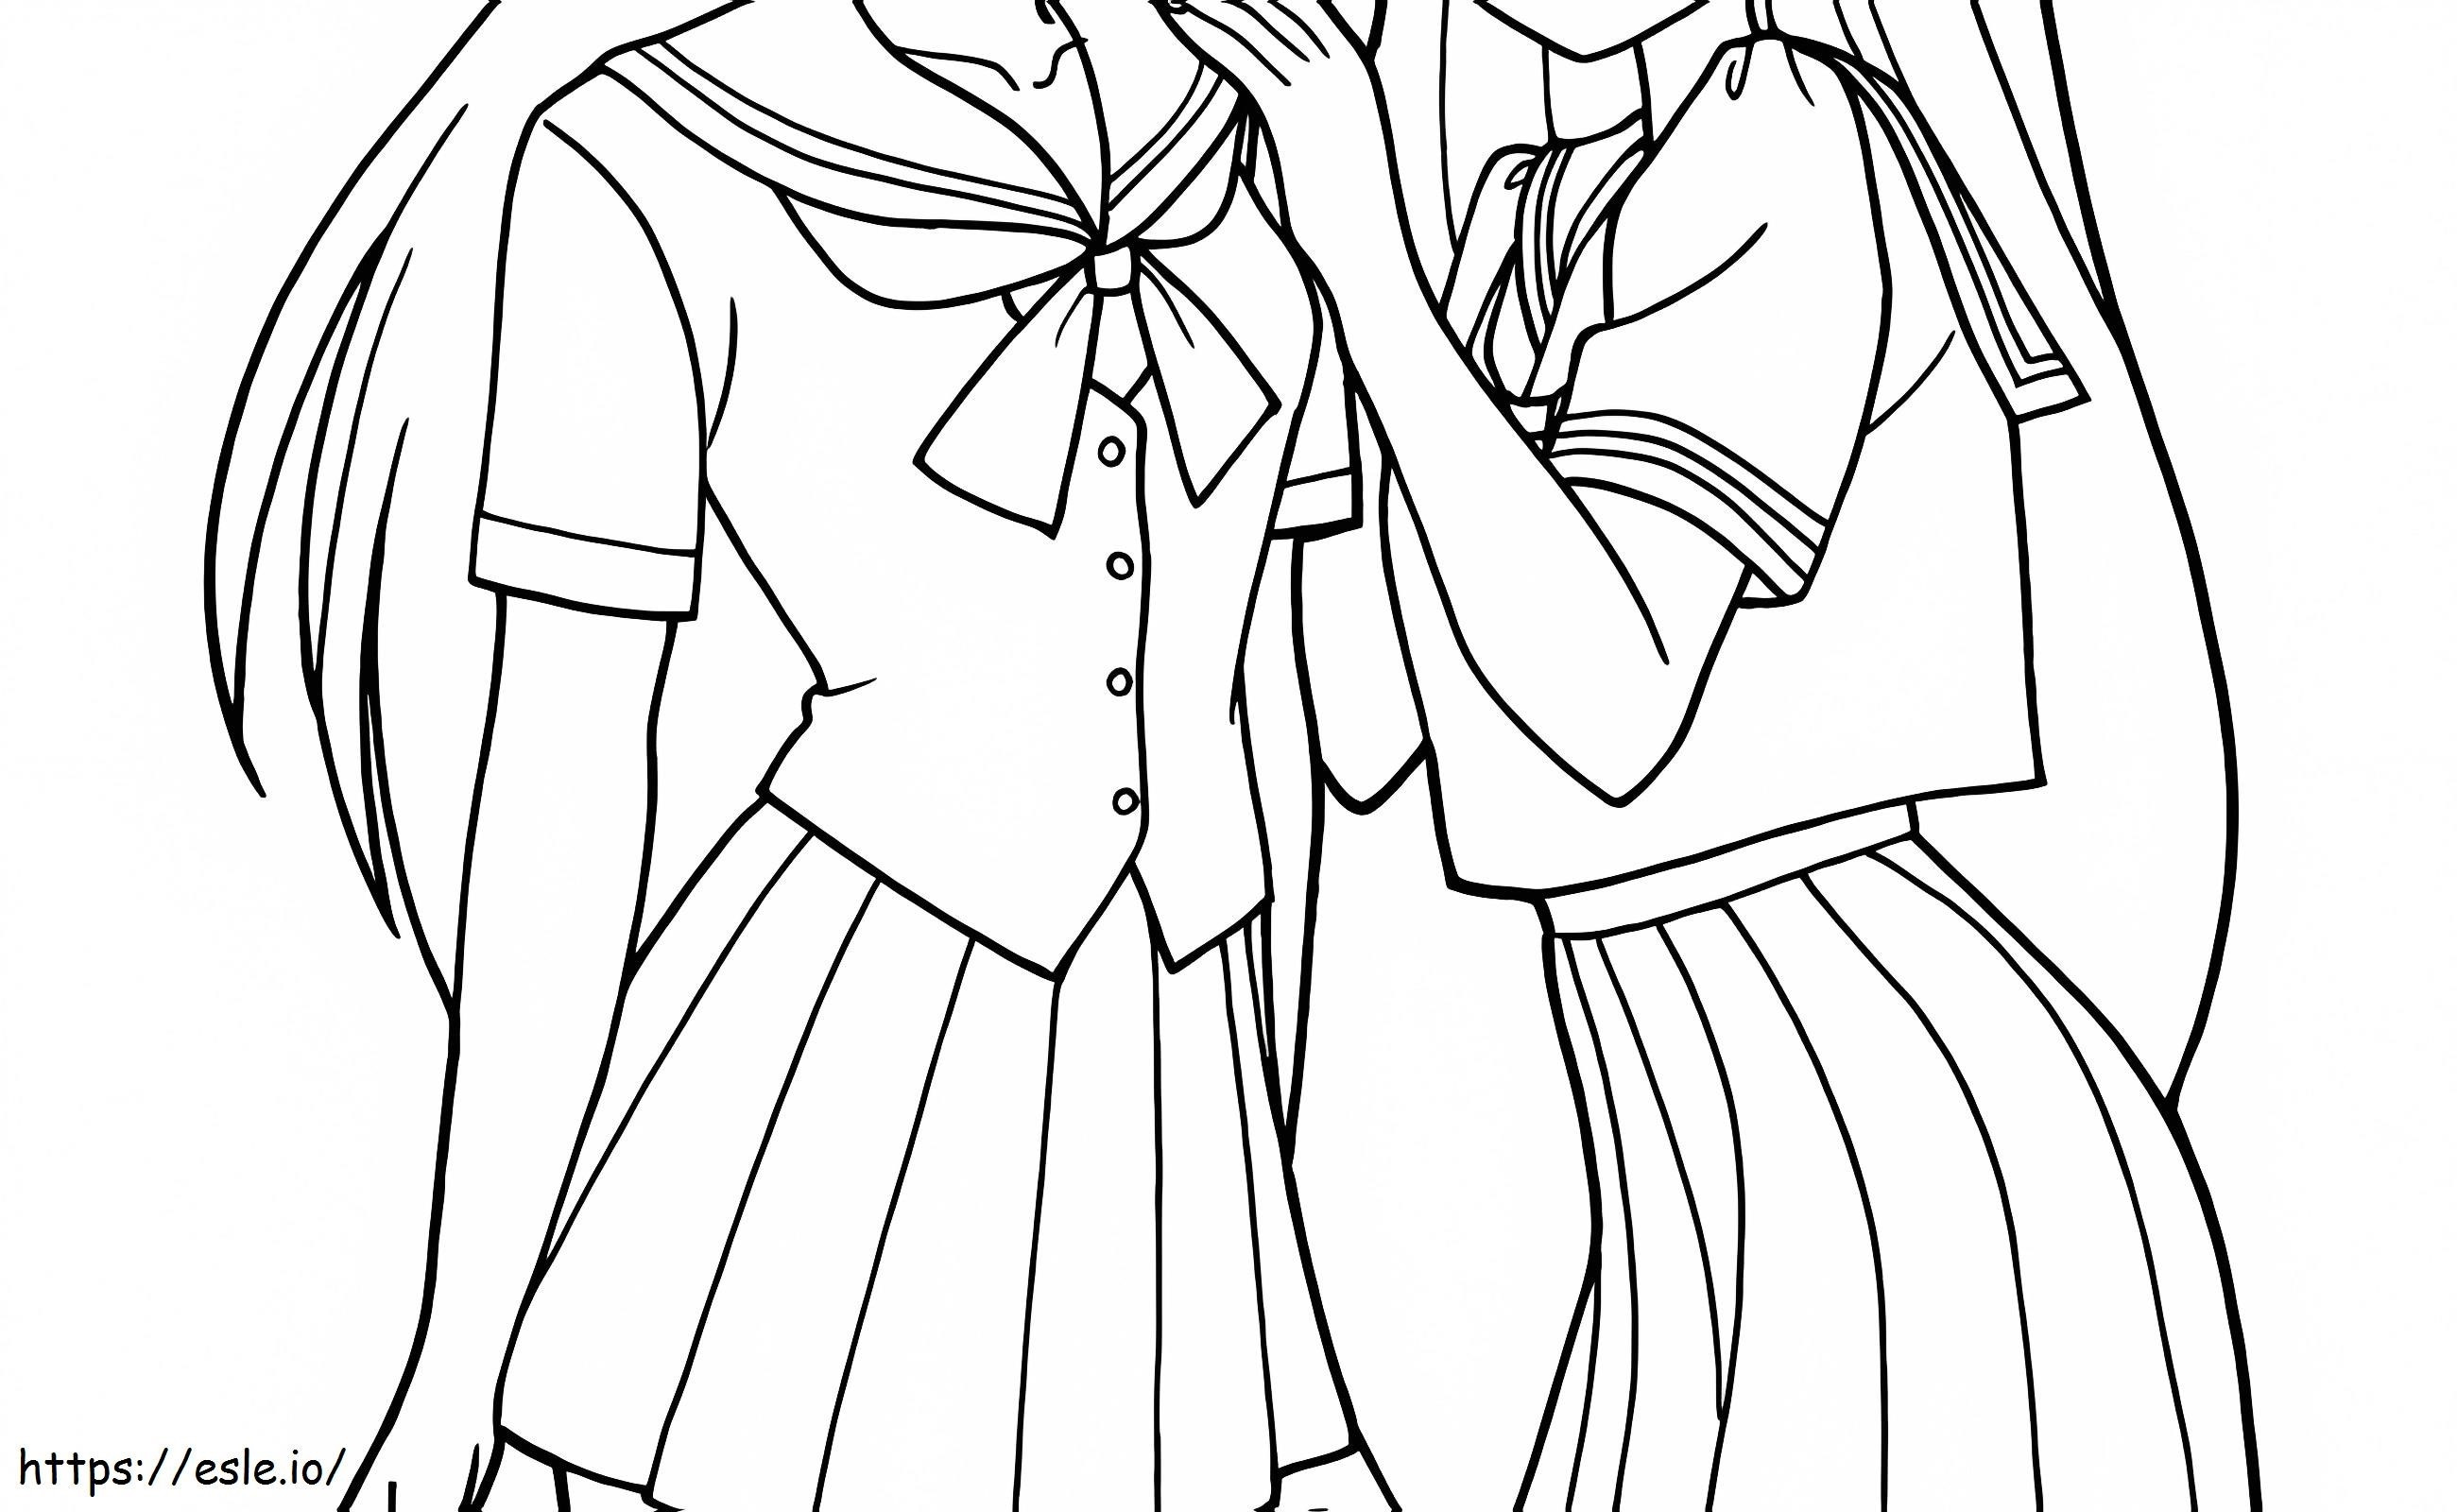 Body Two Anime Girl coloring page